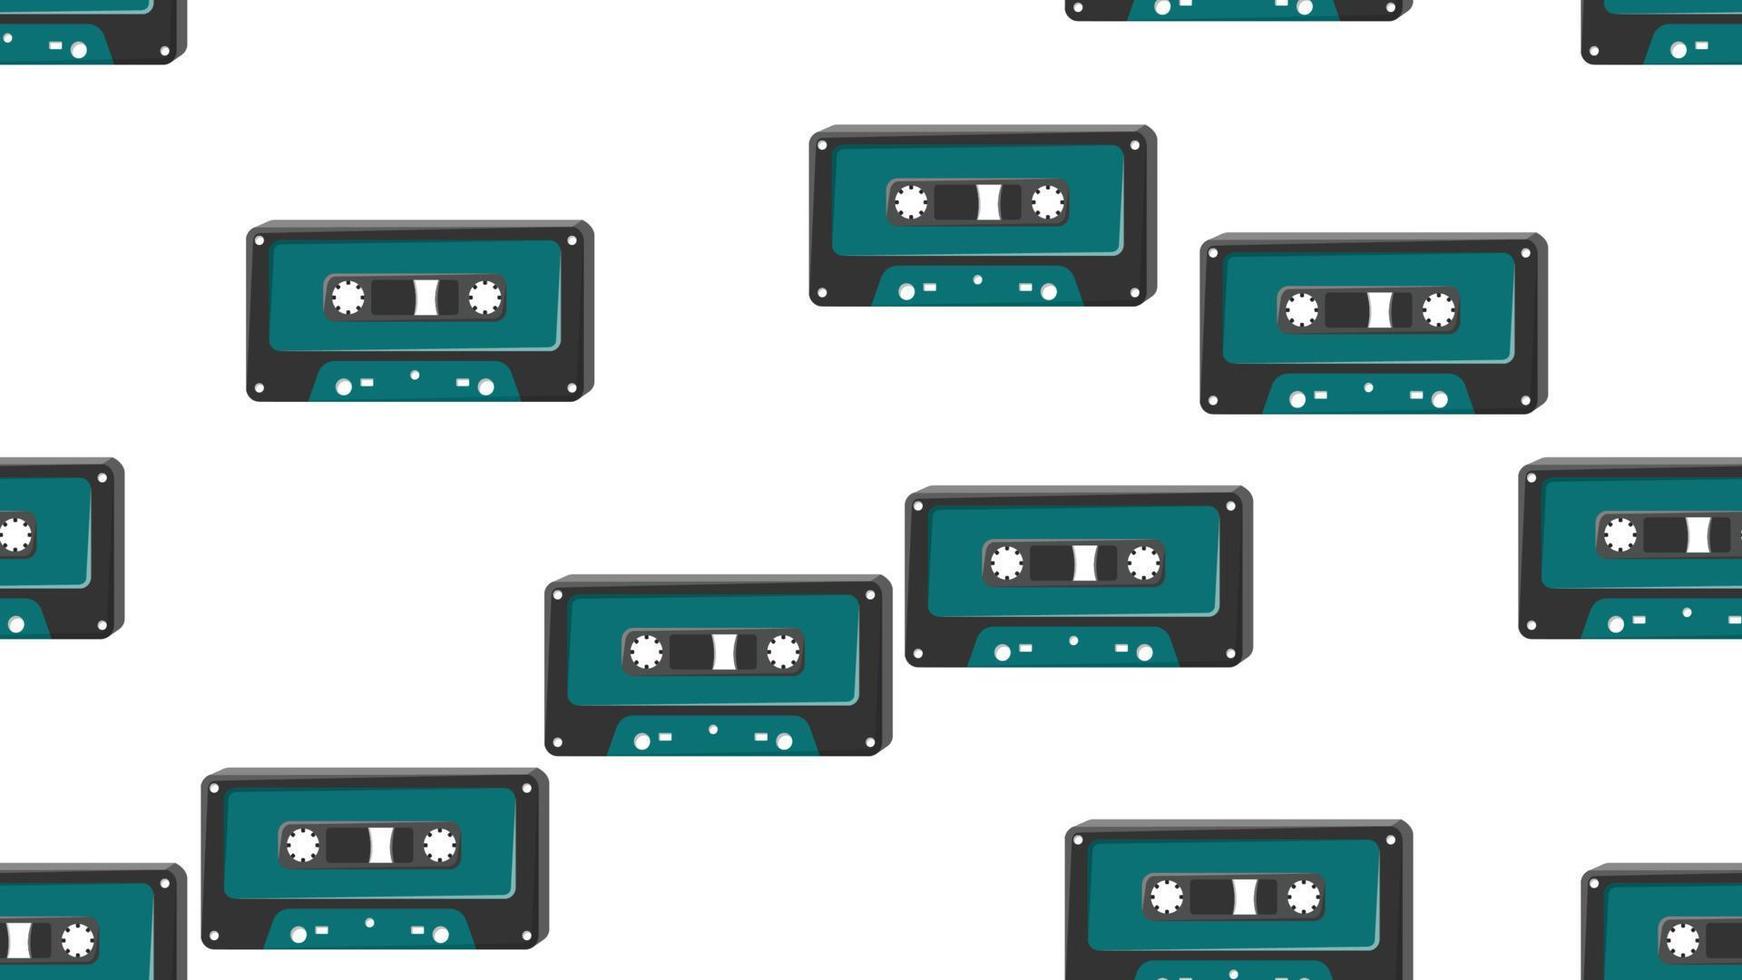 Seamless pattern endless with music audio cassettes old retro vintage hipster from 70s, 80s, 90s isolated on white background. Vector illustration